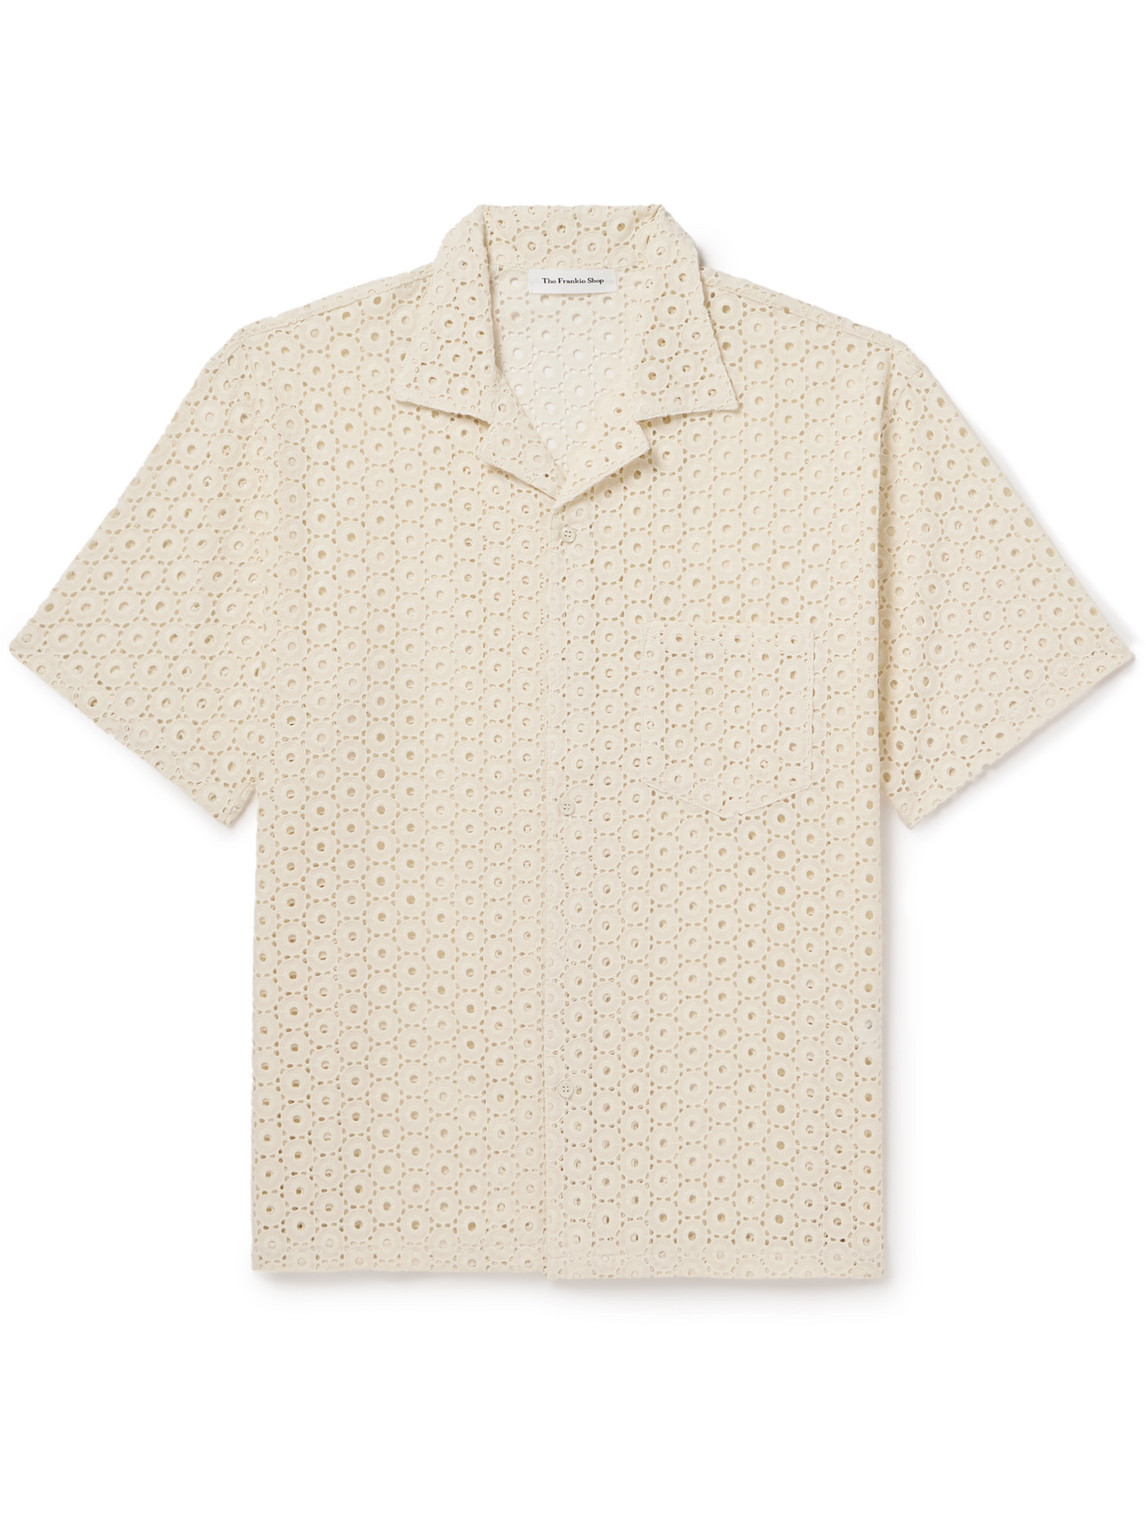 The Frankie Shop Landon Camp-collar Broderie Anglaise Cotton Shirt In Neutrals